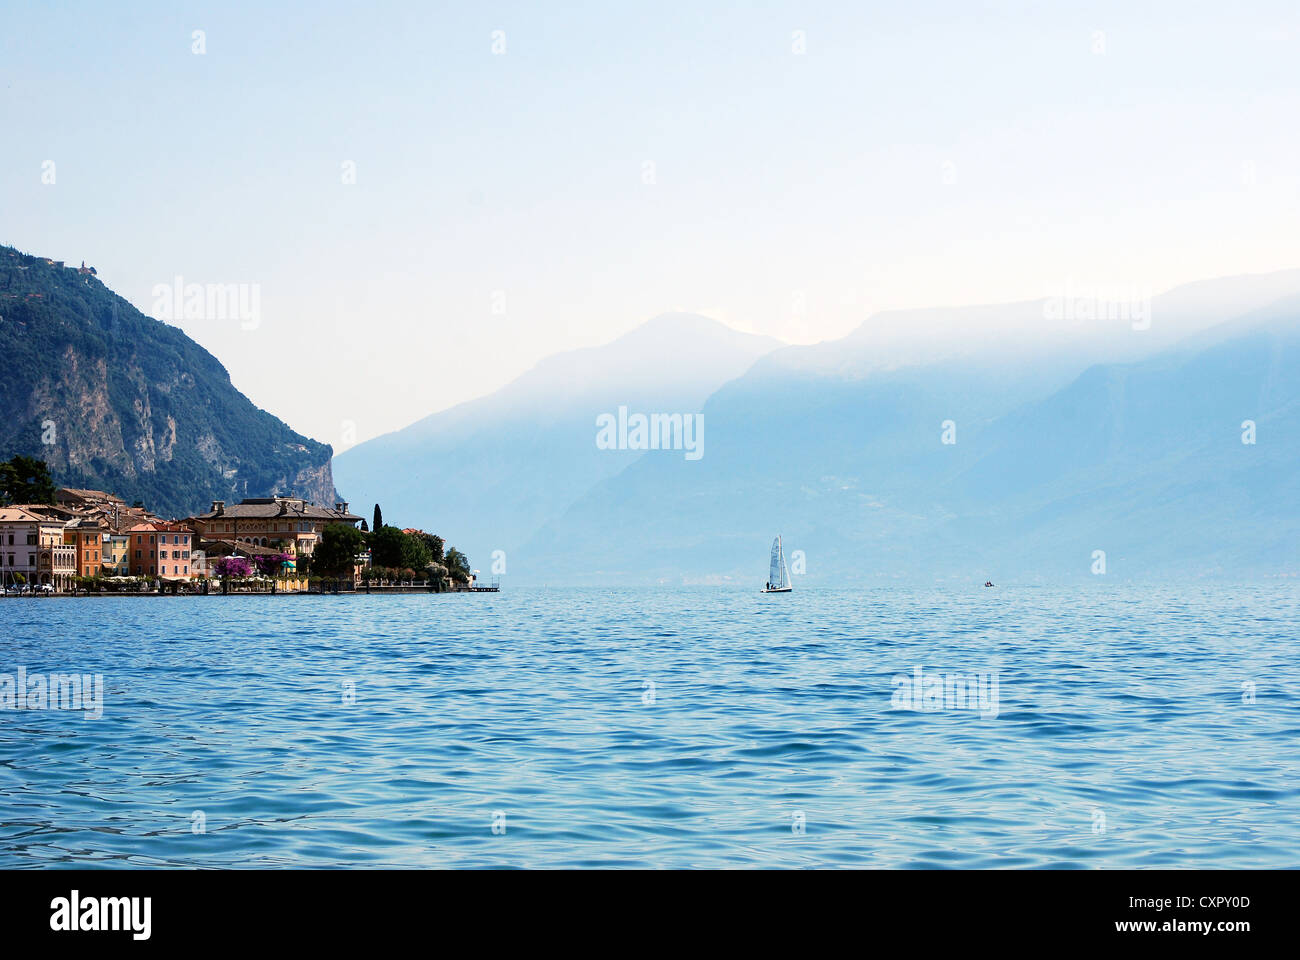 View of mountains, sail boat, and Gargnano from Lake Garda from the Lake District of Lombardy, Italy Stock Photo